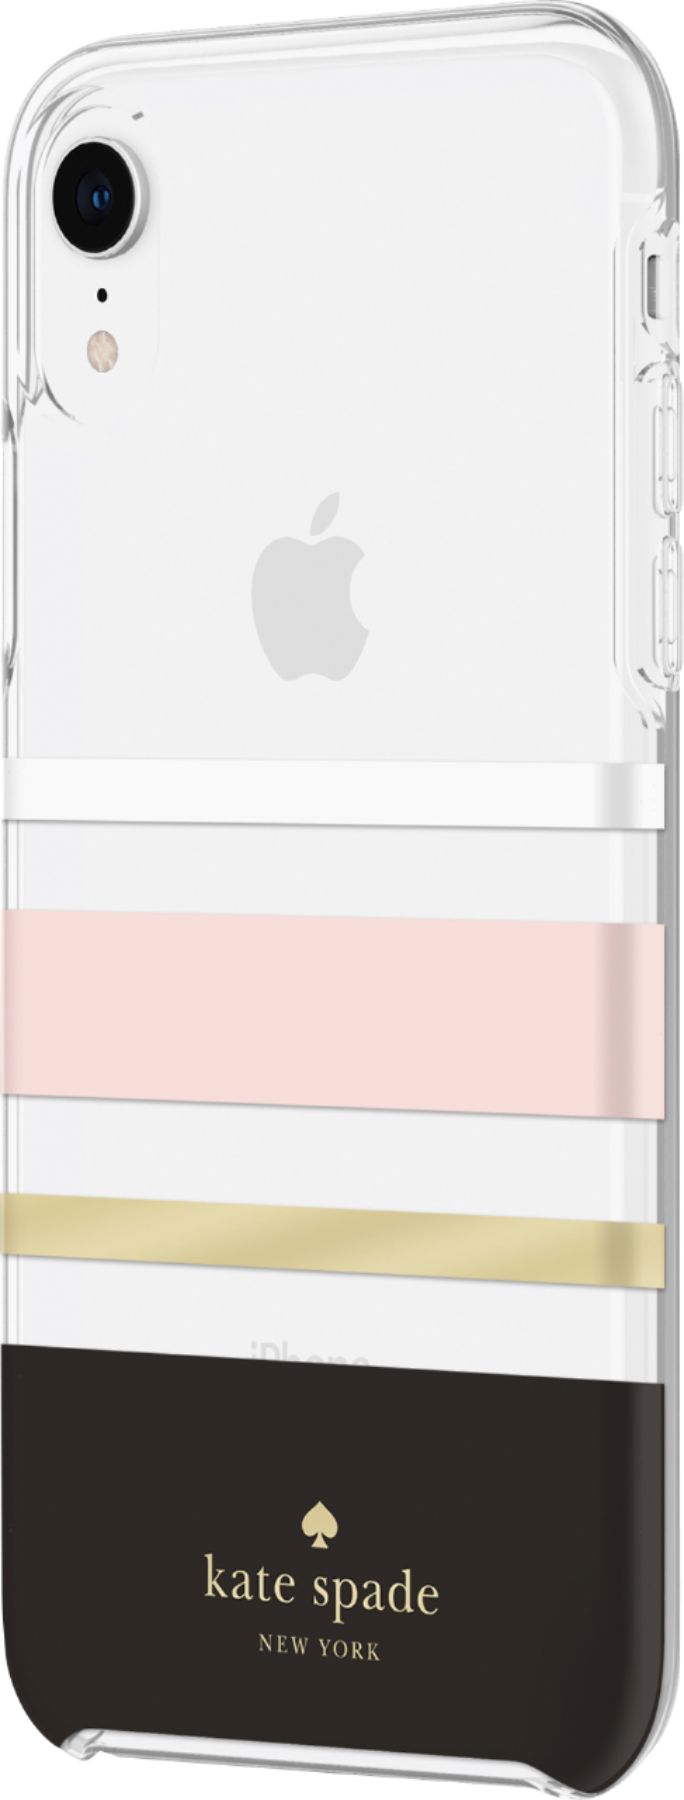 Total 50+ imagen iphone xr cover kate spade